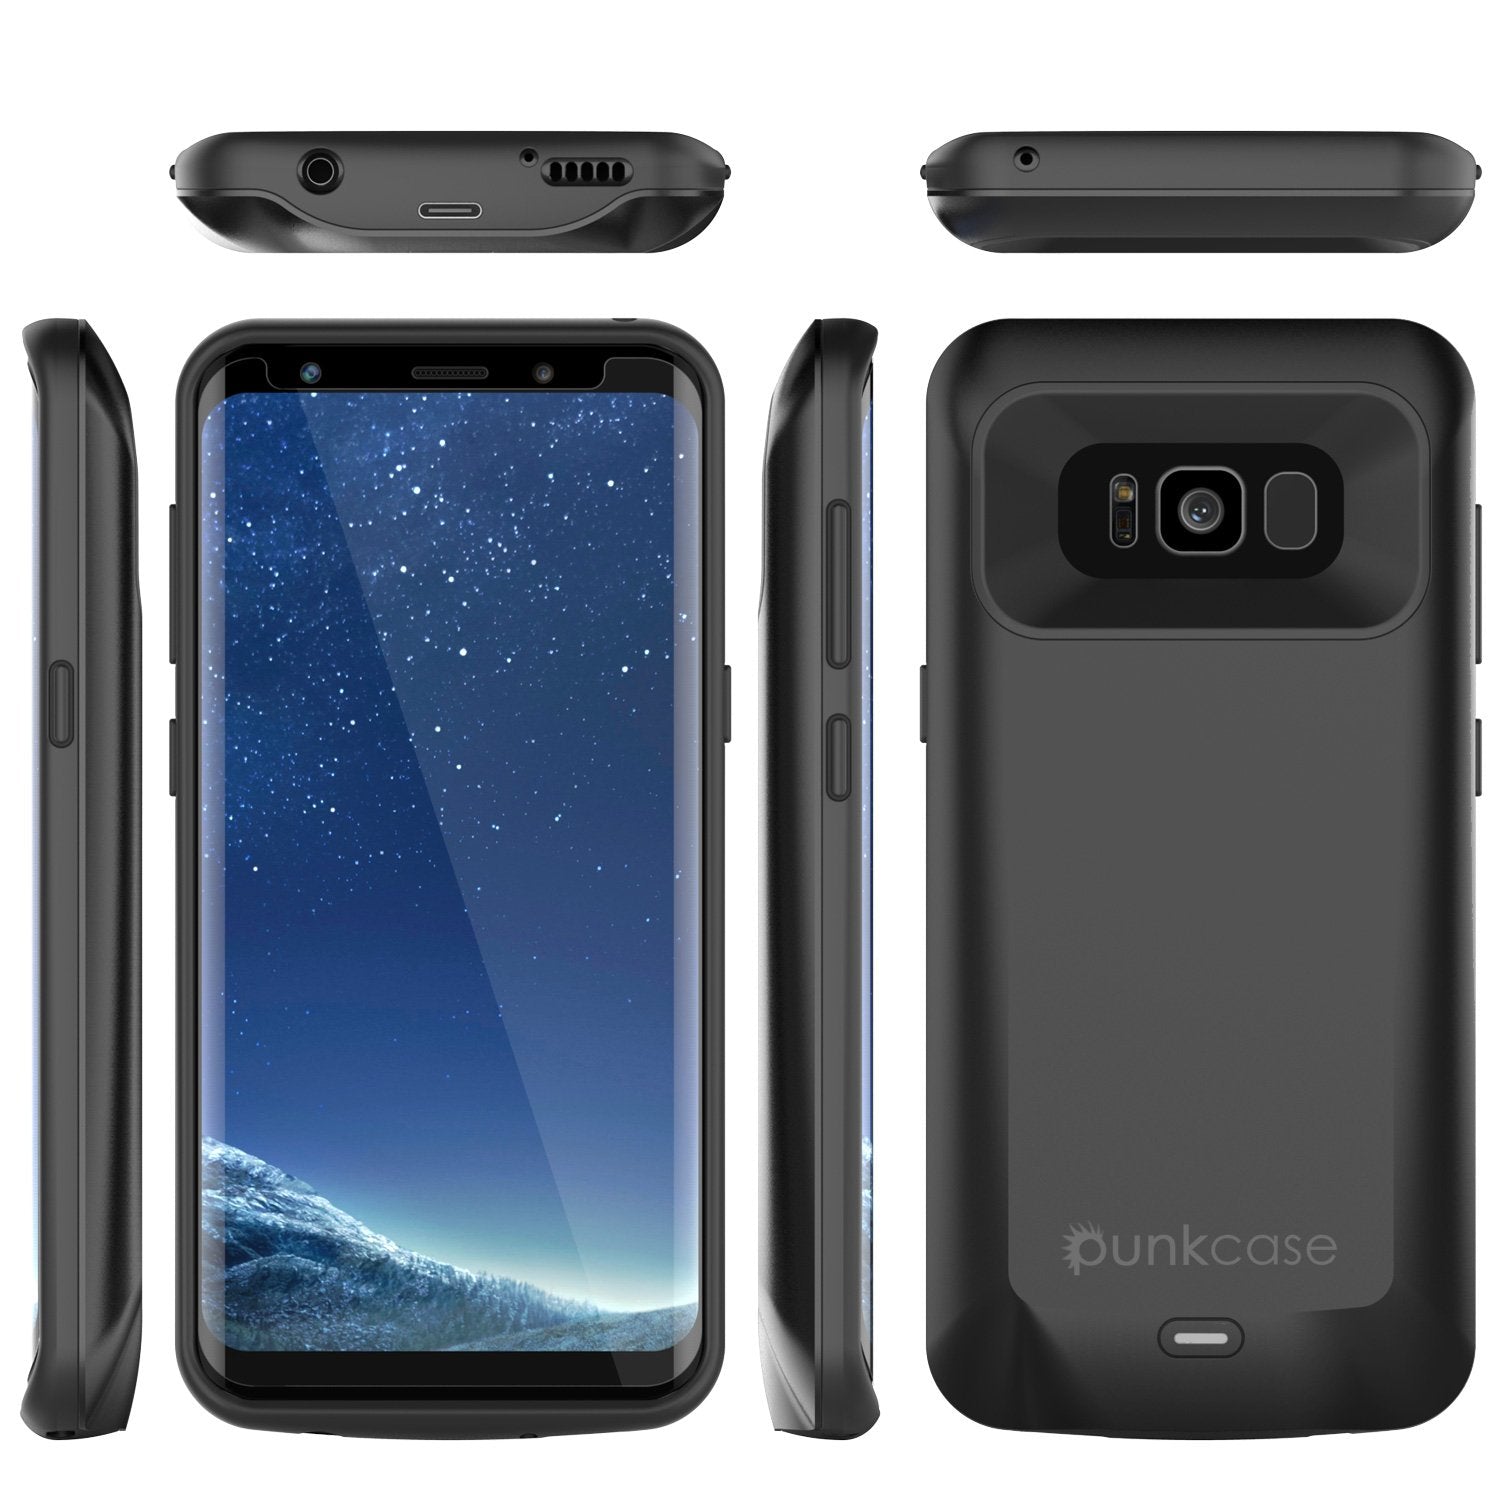 Galaxy S8 Battery Case, Punkcase 5000mAH Charger Case W/ Screen Protector | Integrated Kickstand & USB Port | IntelSwitch [Black]